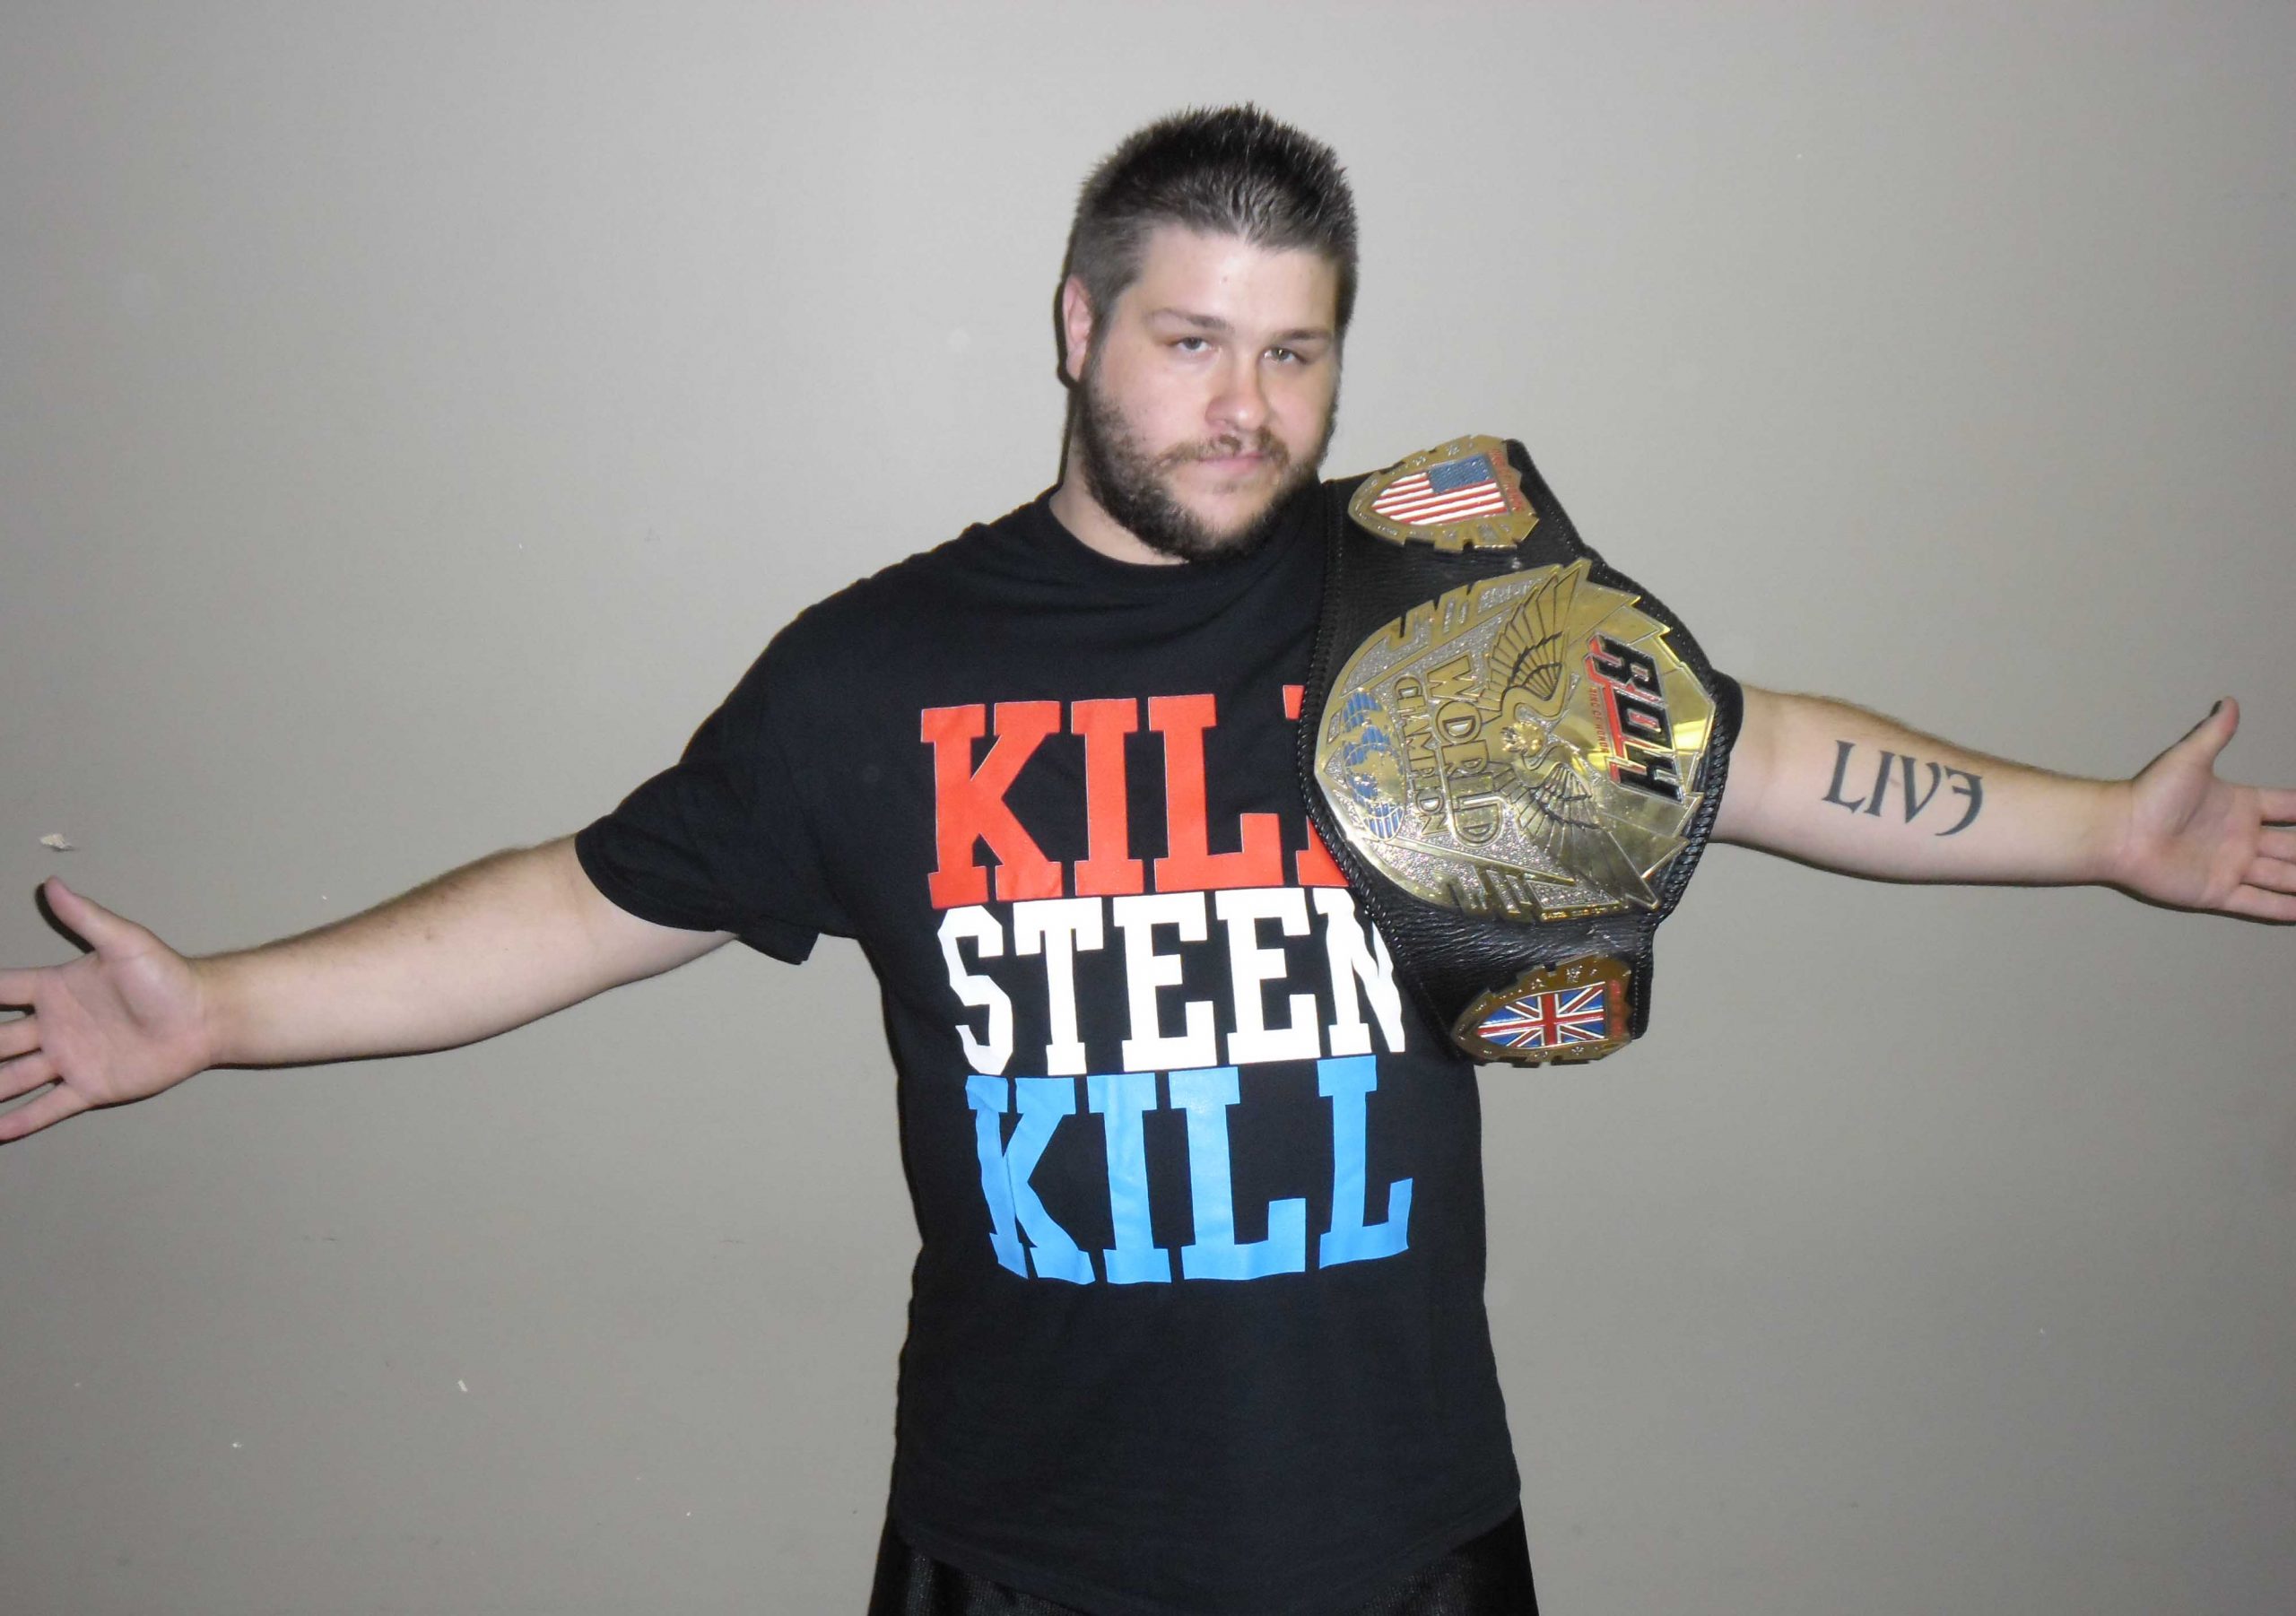 It’s official: Kevin Steen bound for WWE